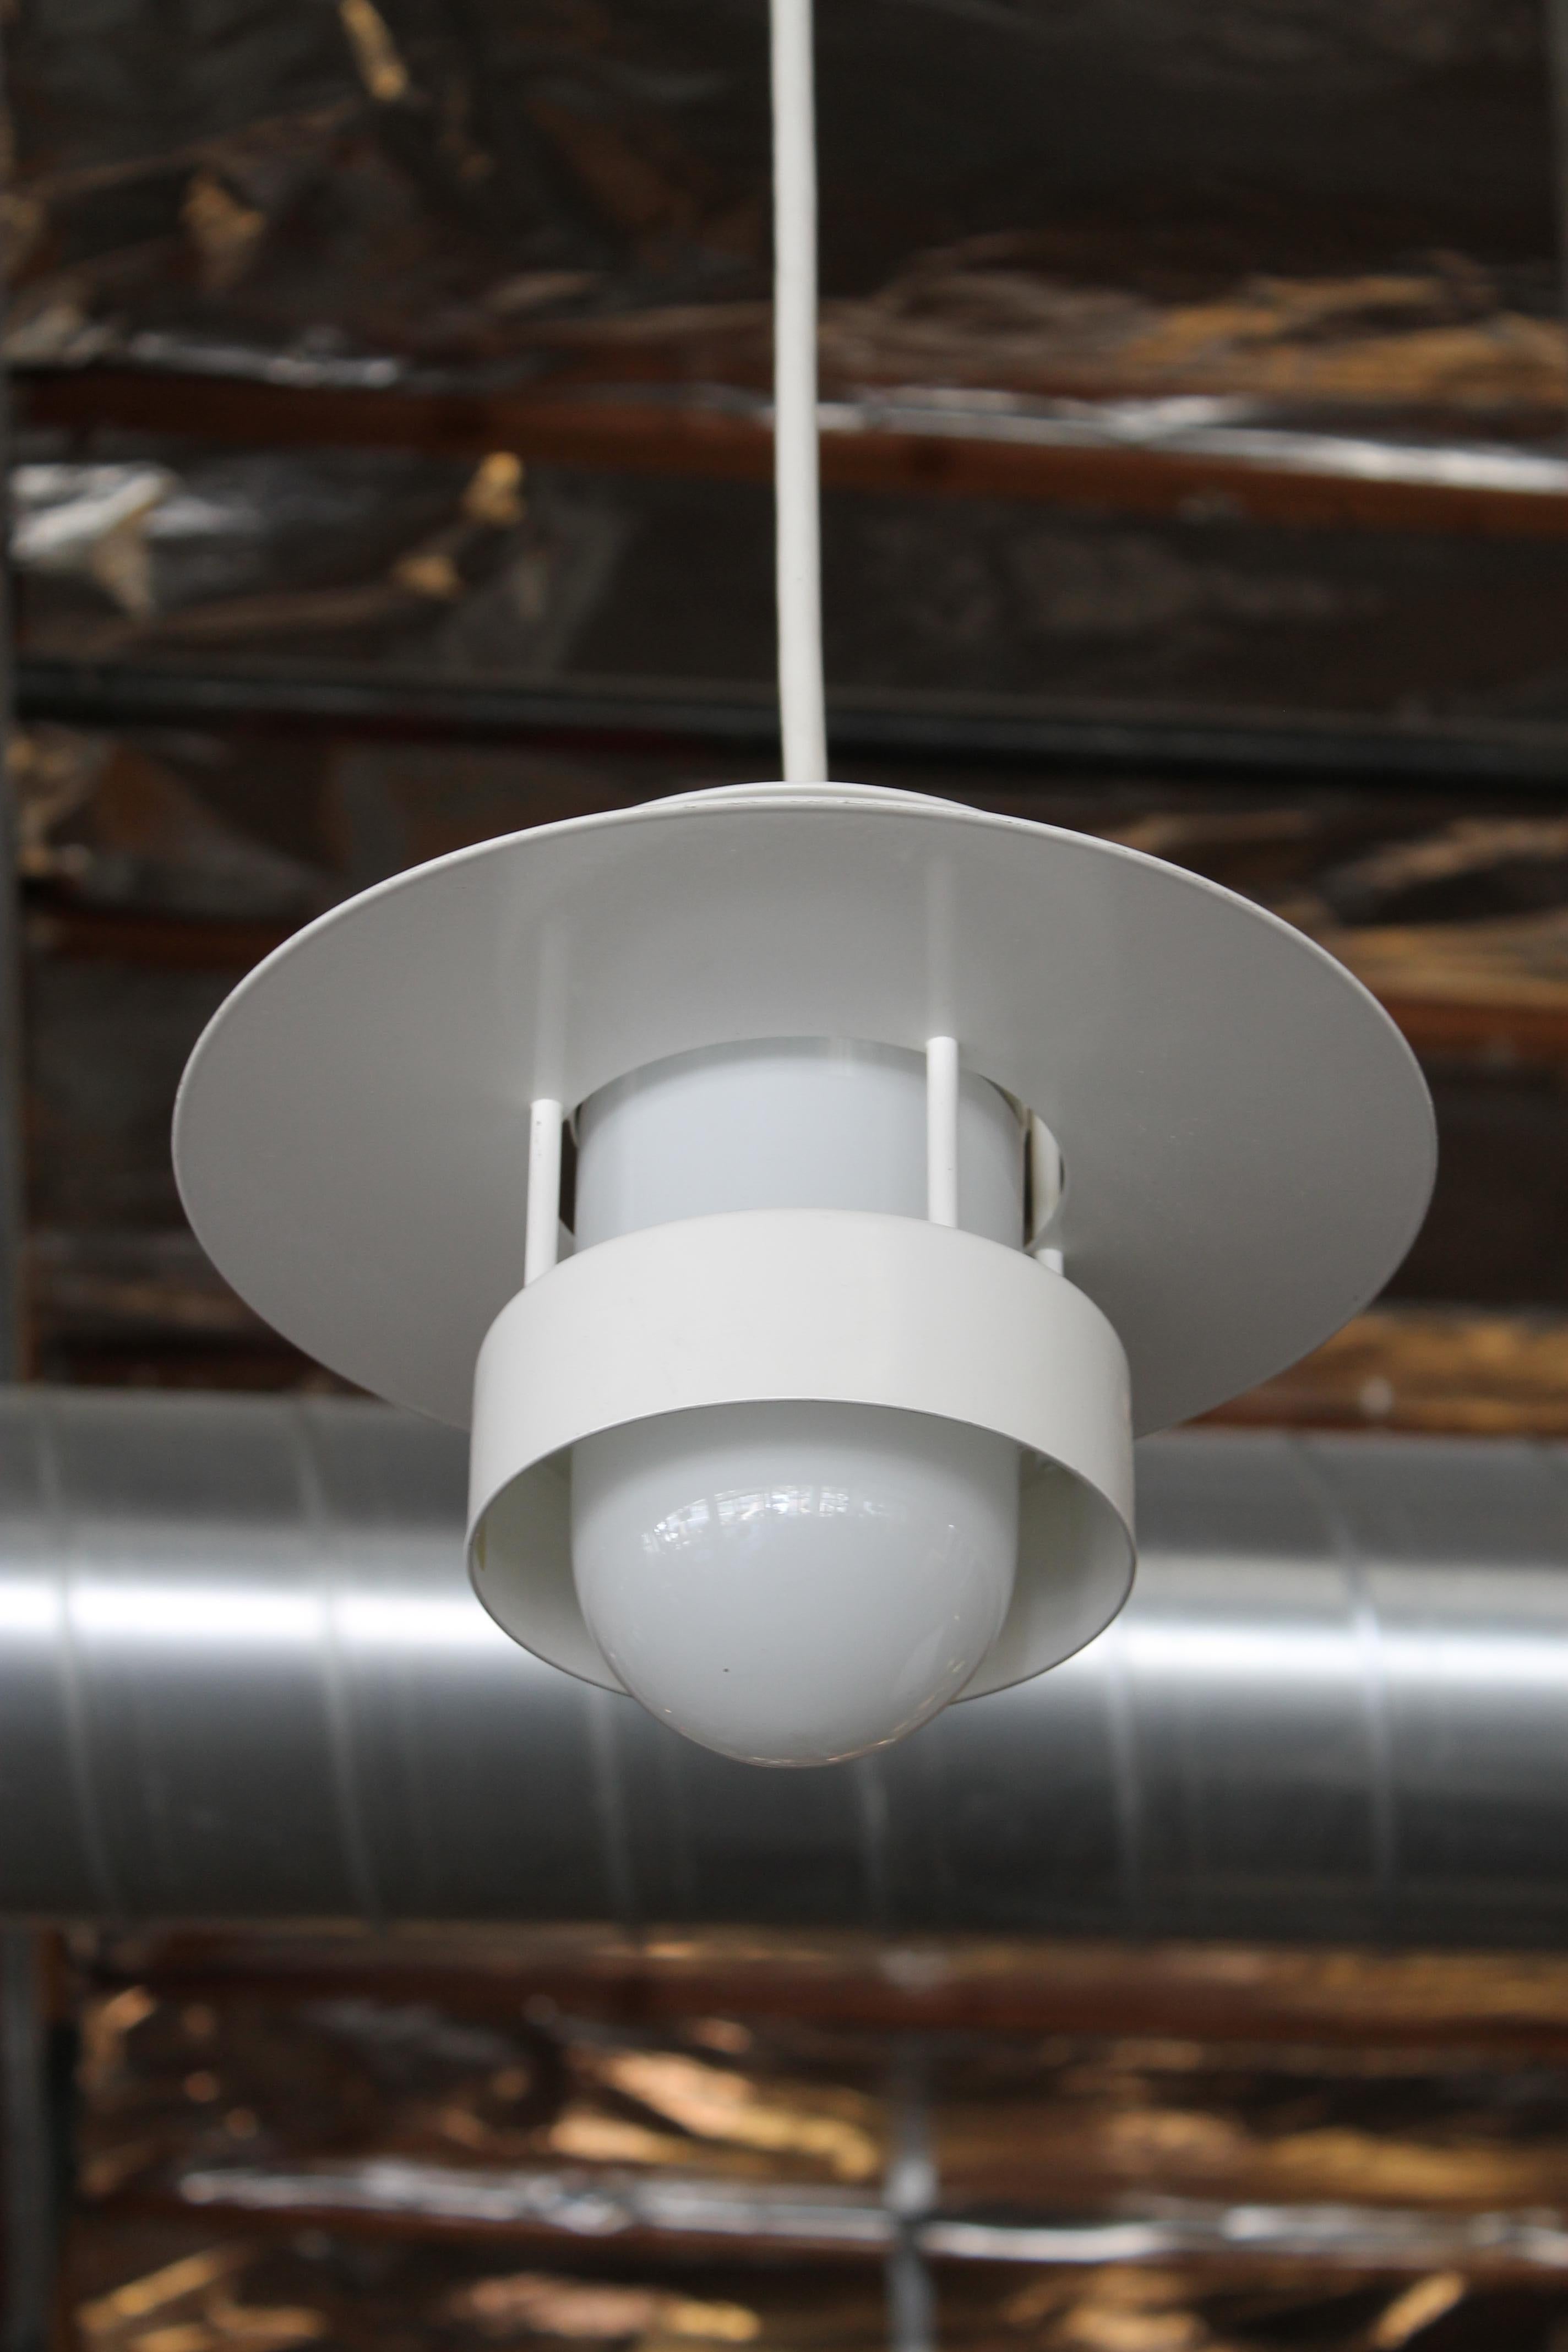 White pendant by Louis Poulsen for the Poulsen Lighting Company. Pendant has been rewired and can accommodate an LED, incandescent or compact fluorescent bulb. Number on label says looks 99-09 which we assume is the year 1999. Cord is 40